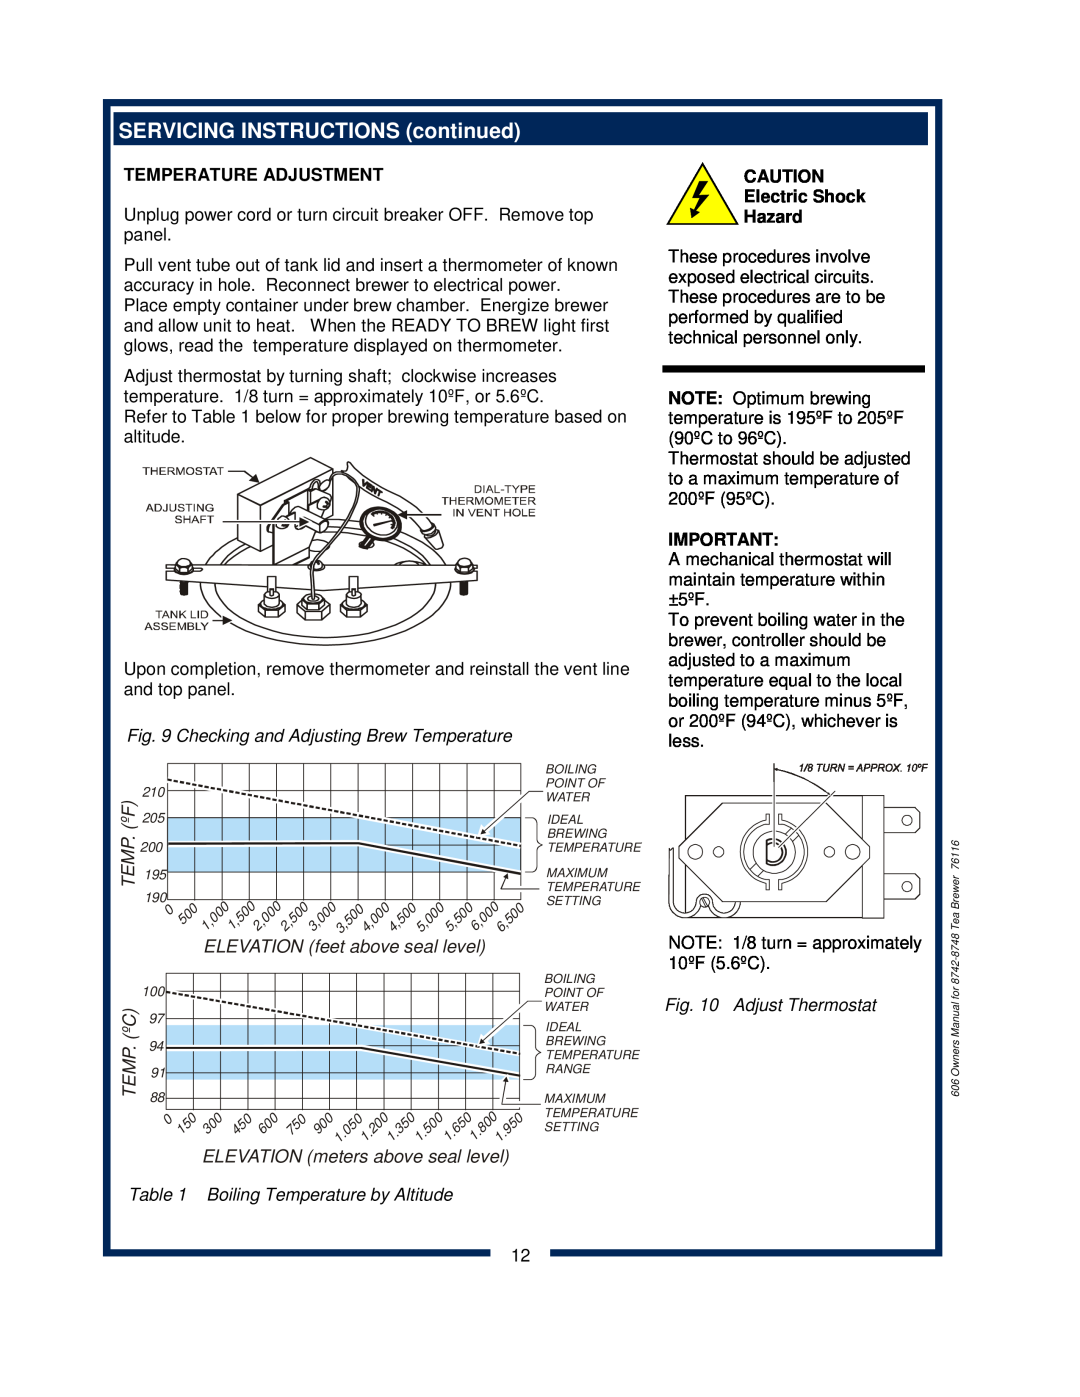 Bloomfield 8742 SERVICING INSTRUCTIONS continued, Temperature Adjustment, Checking and Adjusting Brew Temperature 